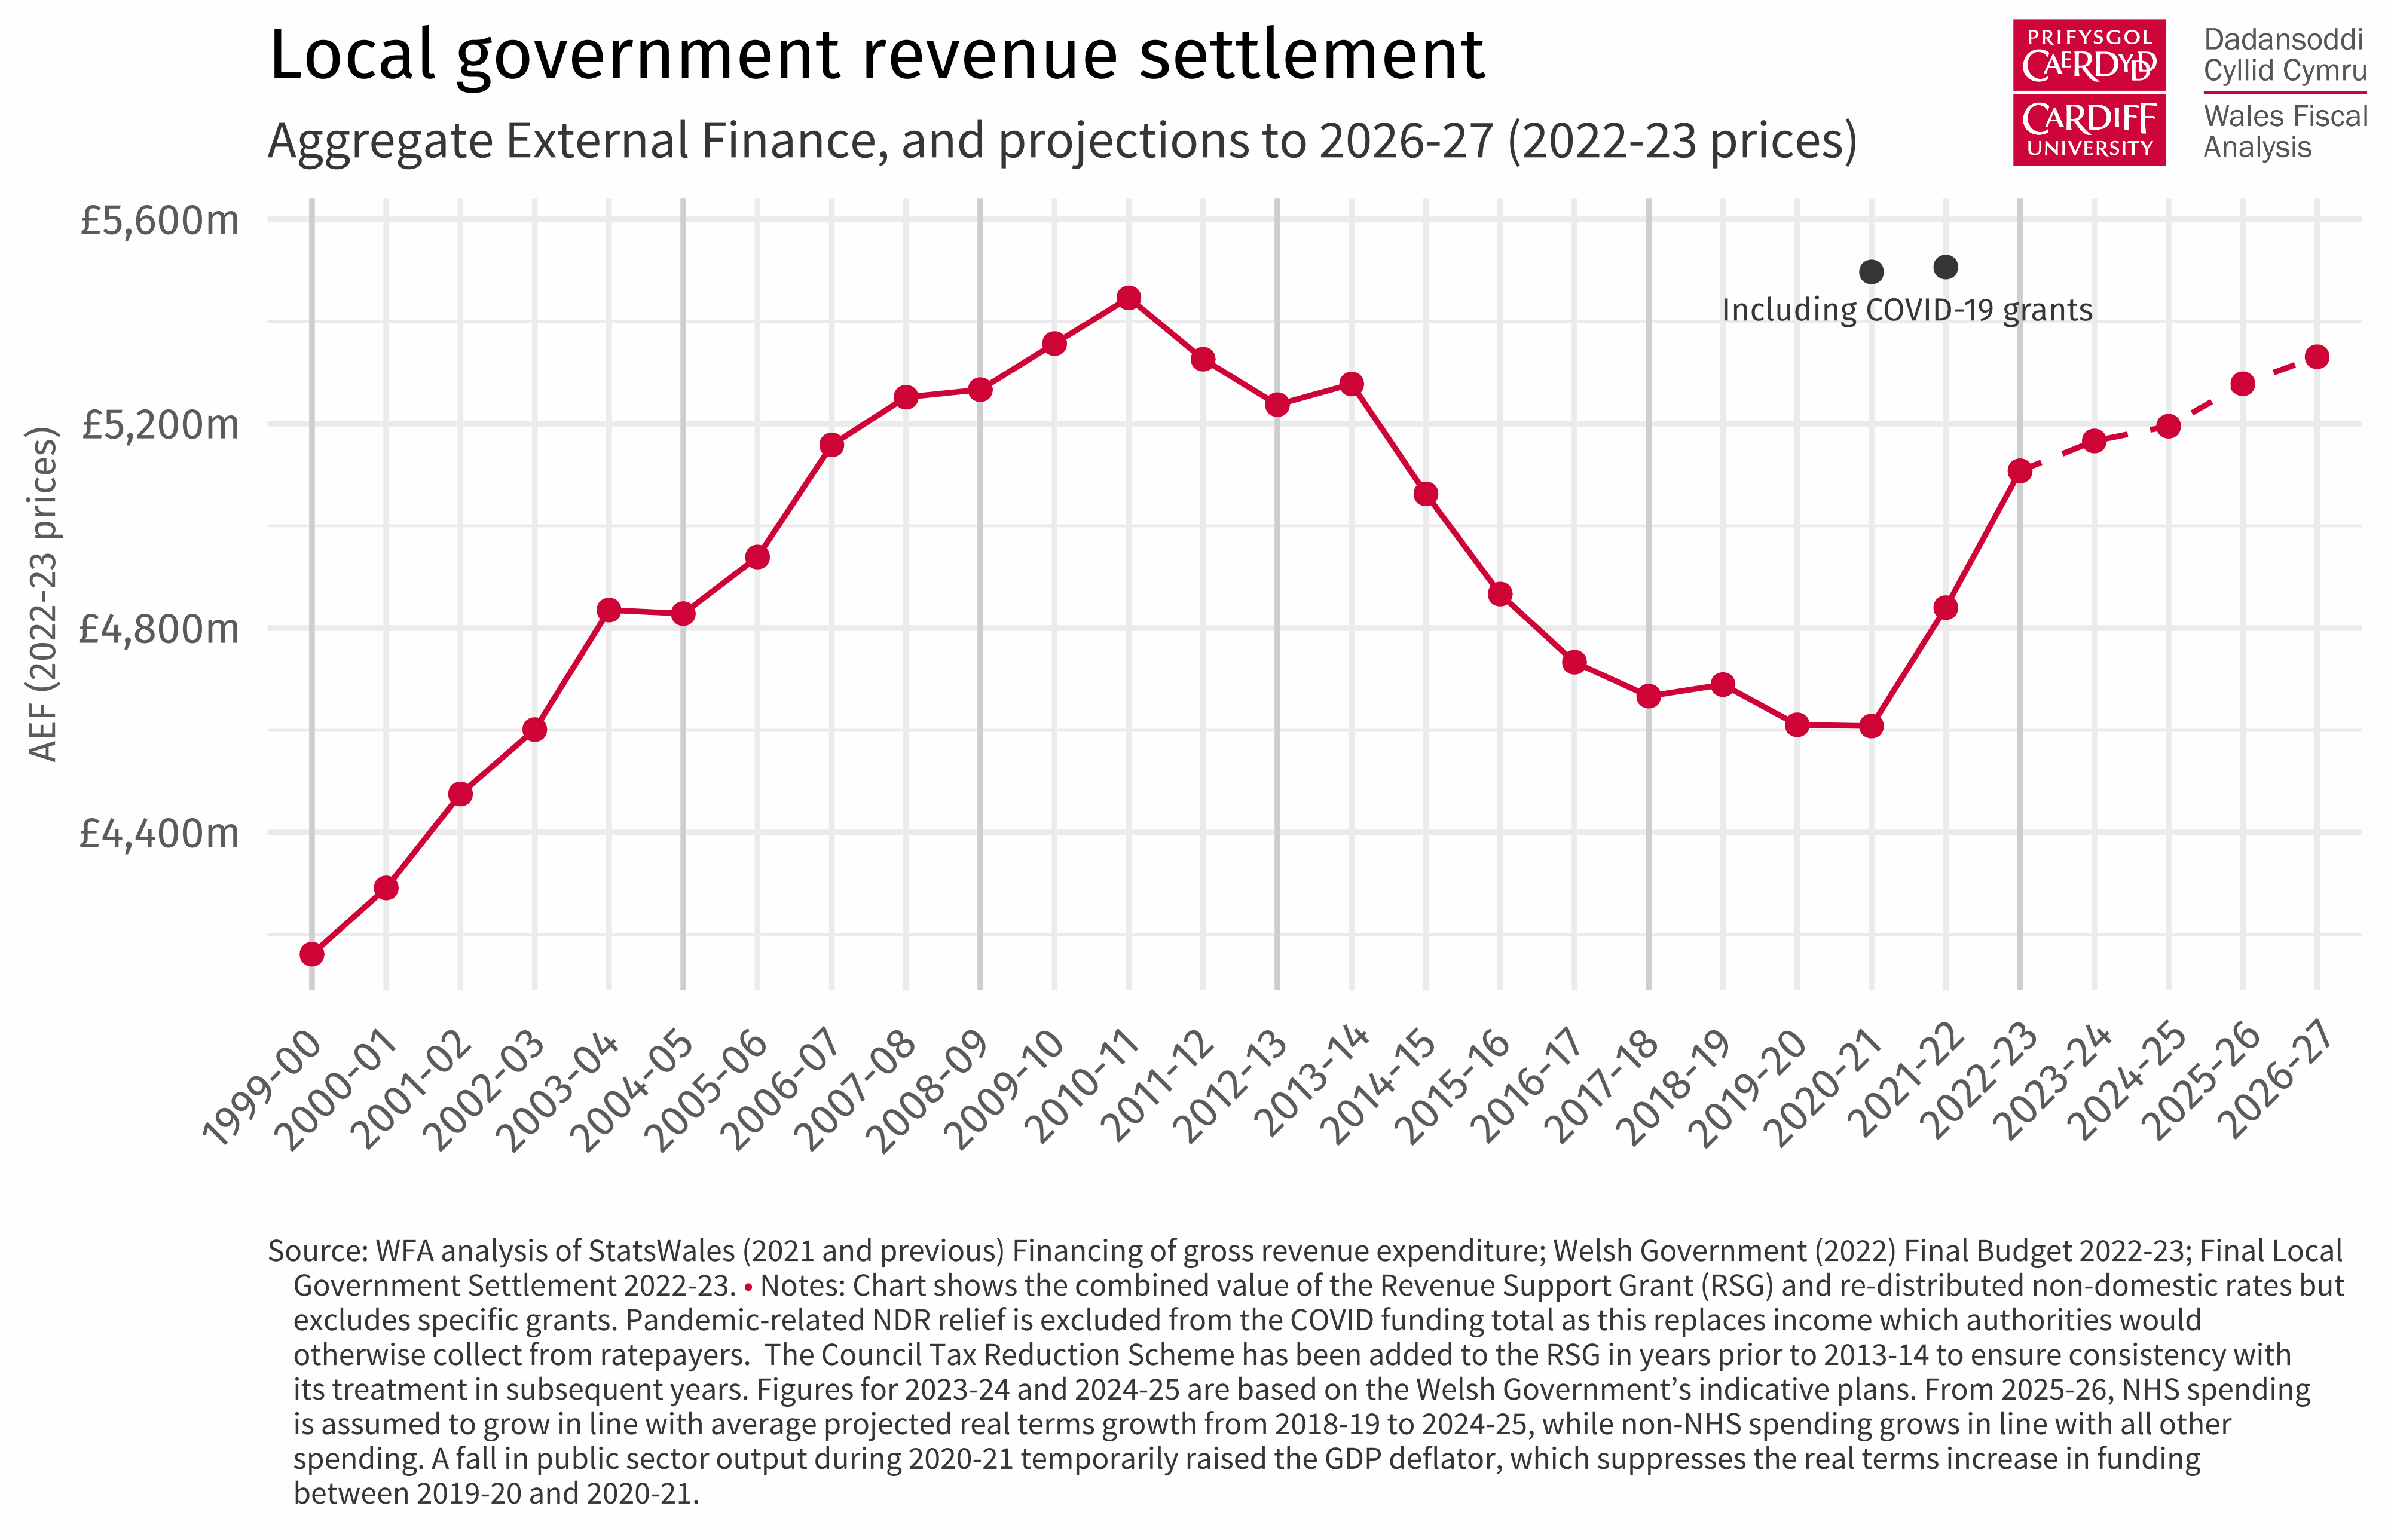 Line chart showing the local government revenue settlement from 1999-00 to 2022-23, with projections to 2026-27 in real terms.